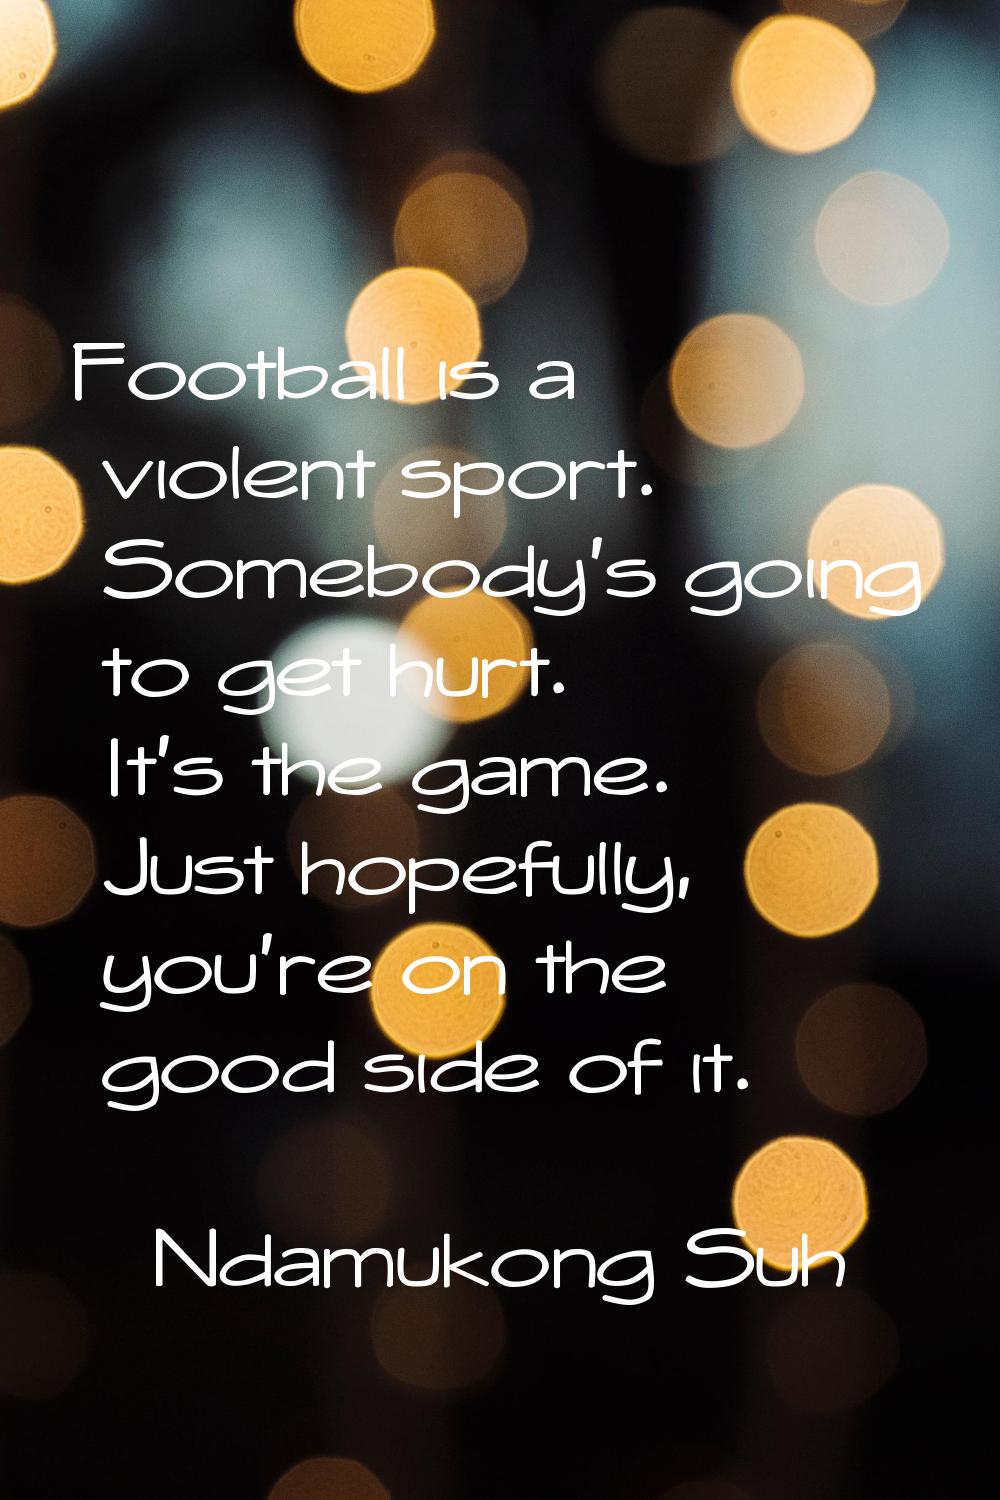 Football is a violent sport. Somebody's going to get hurt. It's the game. Just hopefully, you're on